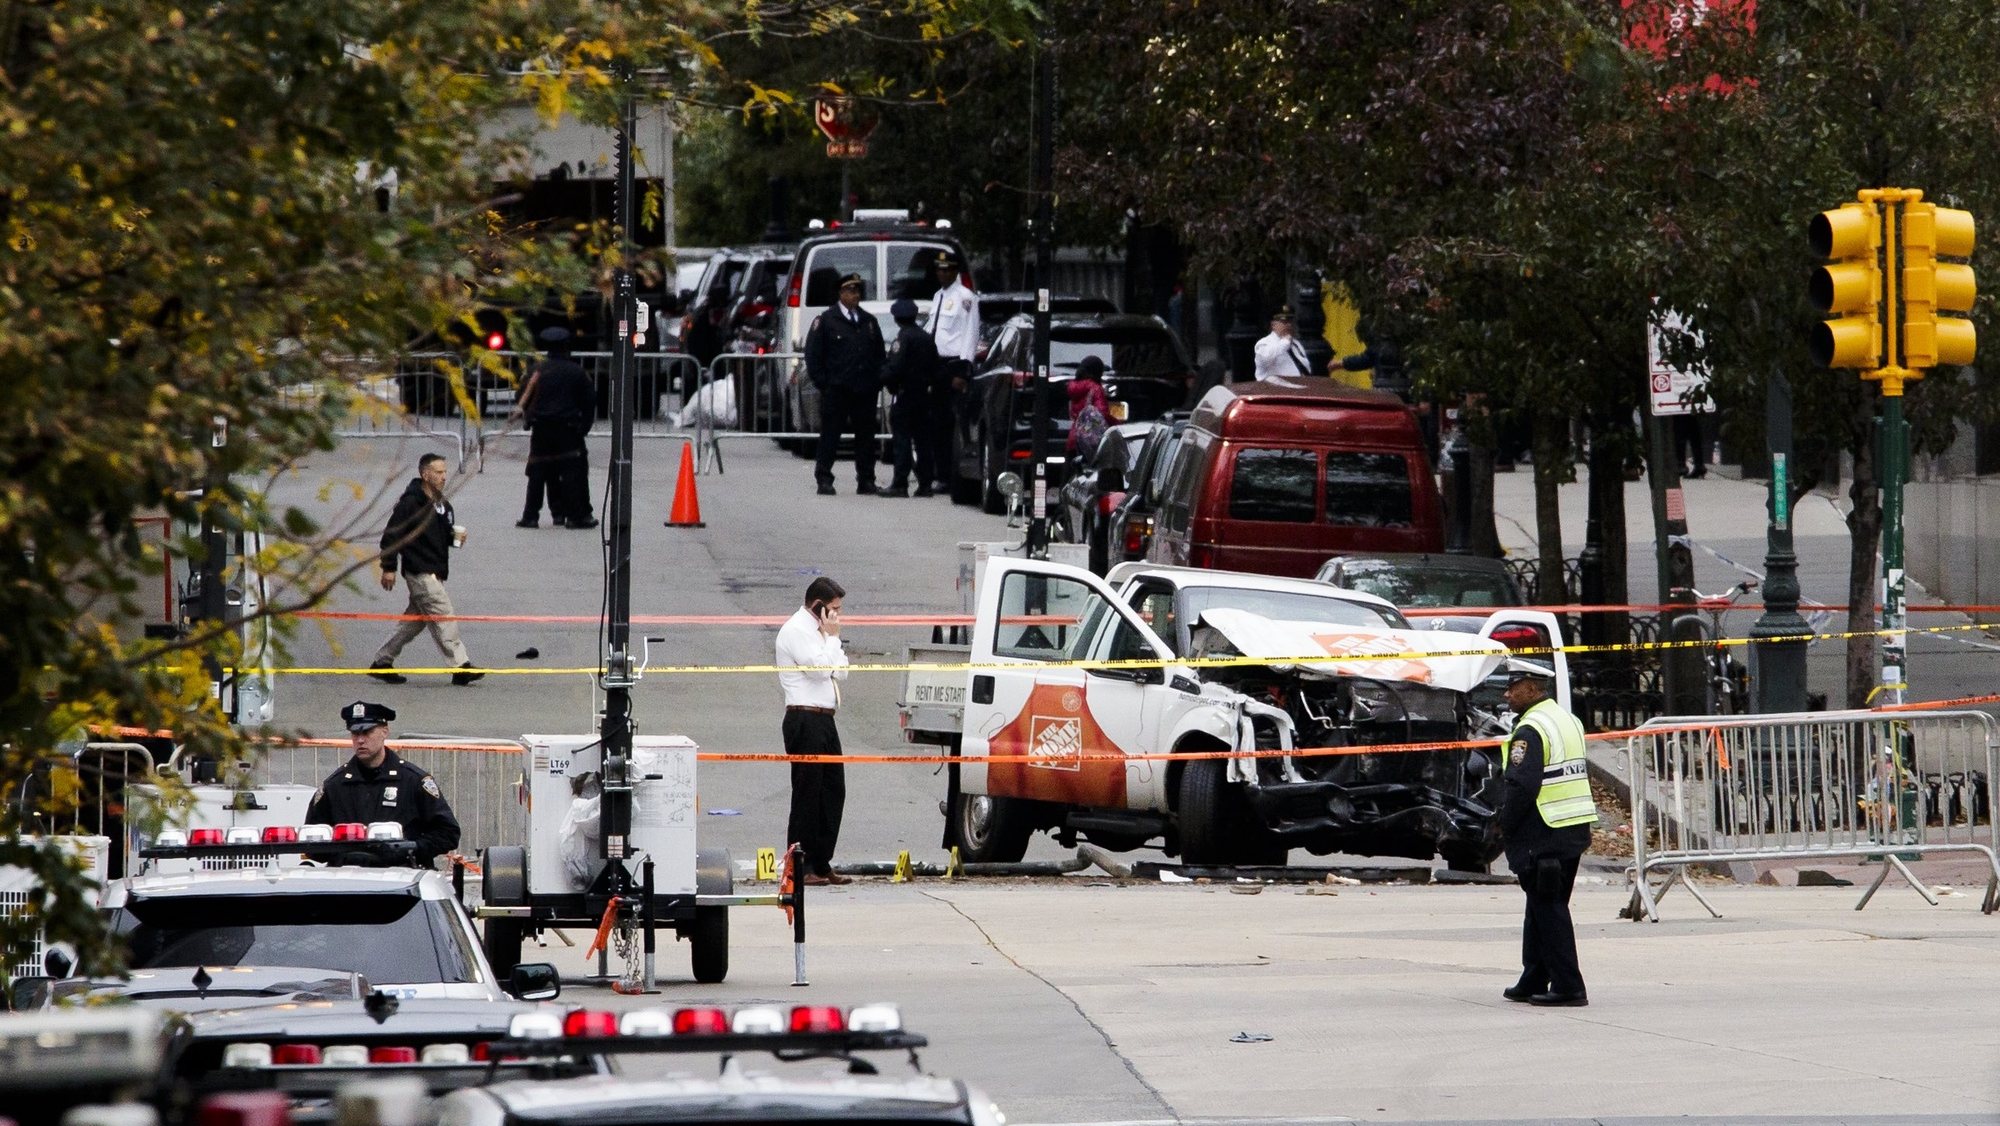 epa06302061 Investigators work at the scene of an attack on 31 October where a man driving a truck killed eight people and injured 11 in New York, New York, USA, 01 November 2017. The attacker, Sayfullo Saipov, was shot after jumping out of the truck and is in critical condition. The attack is being investigated as a terrorist incident.  EPA/JUSTIN LANE